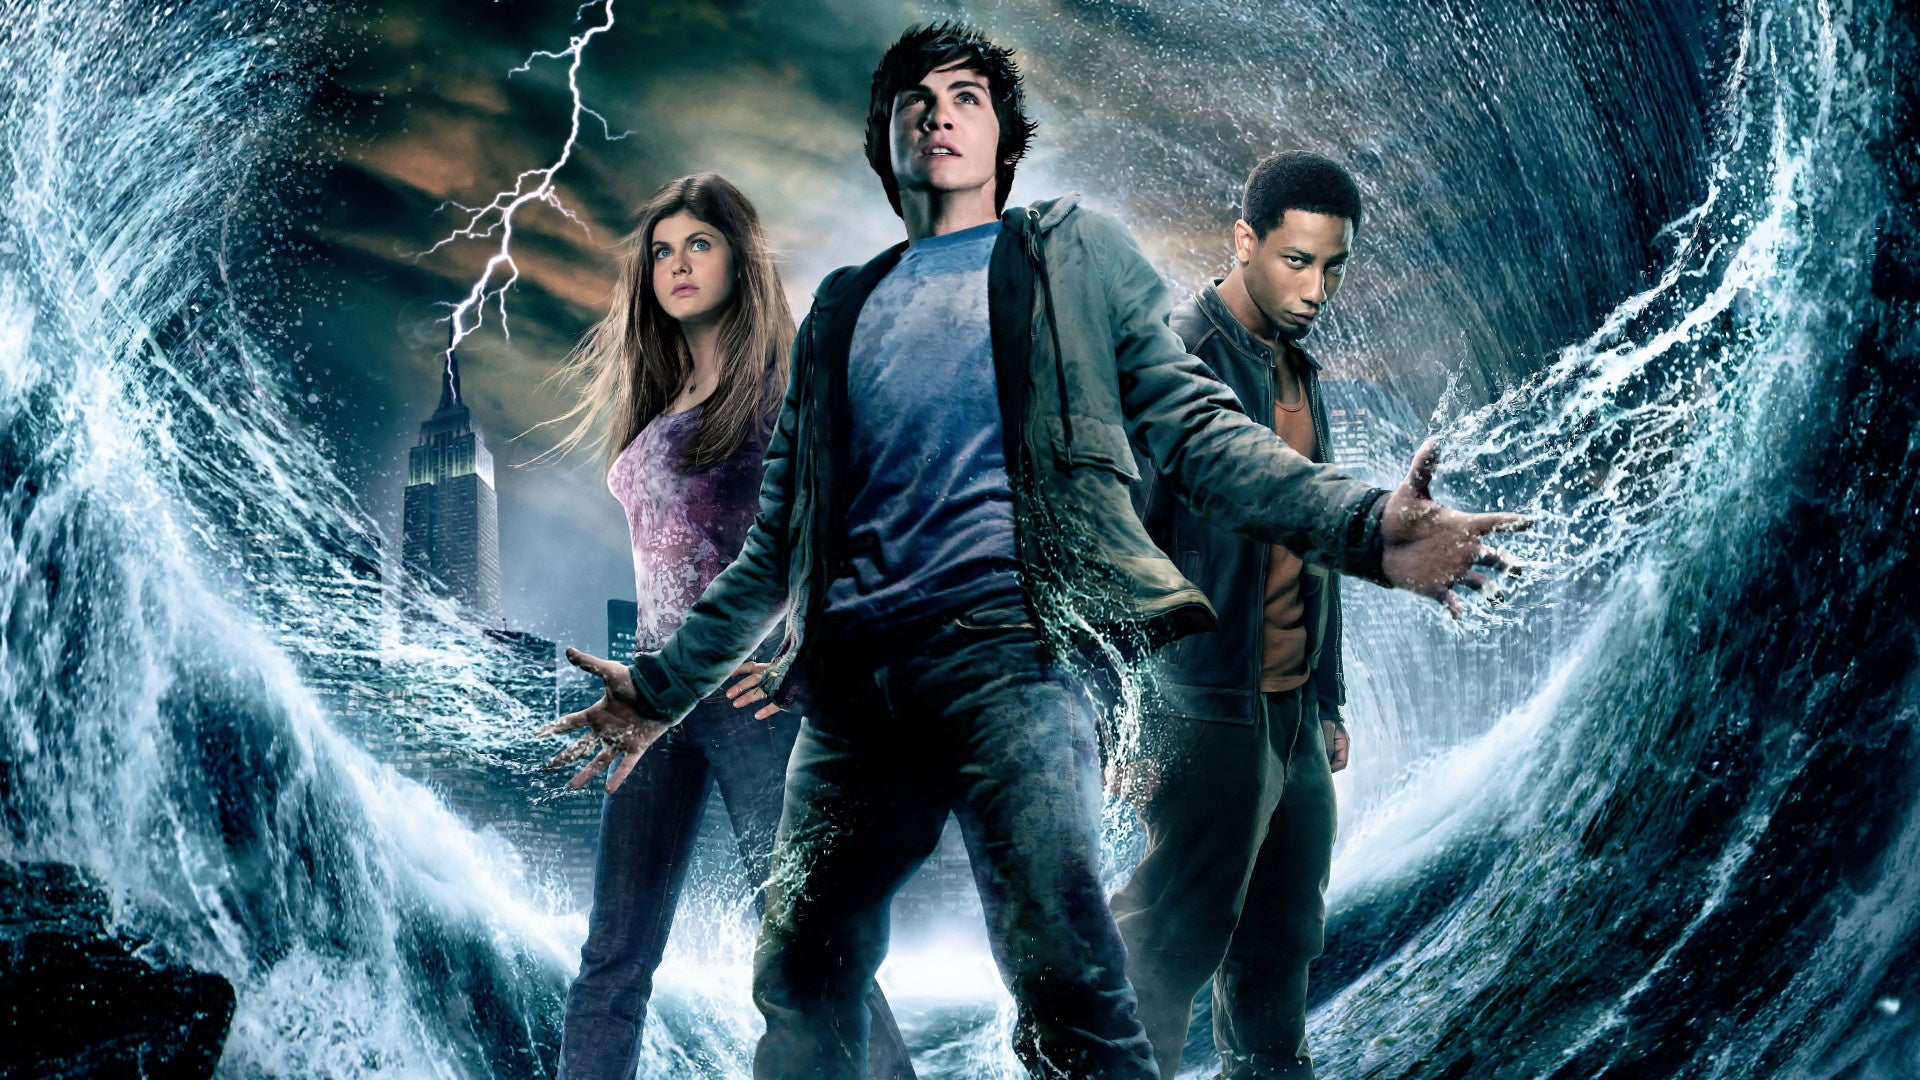 Percy Jackson Double Feature